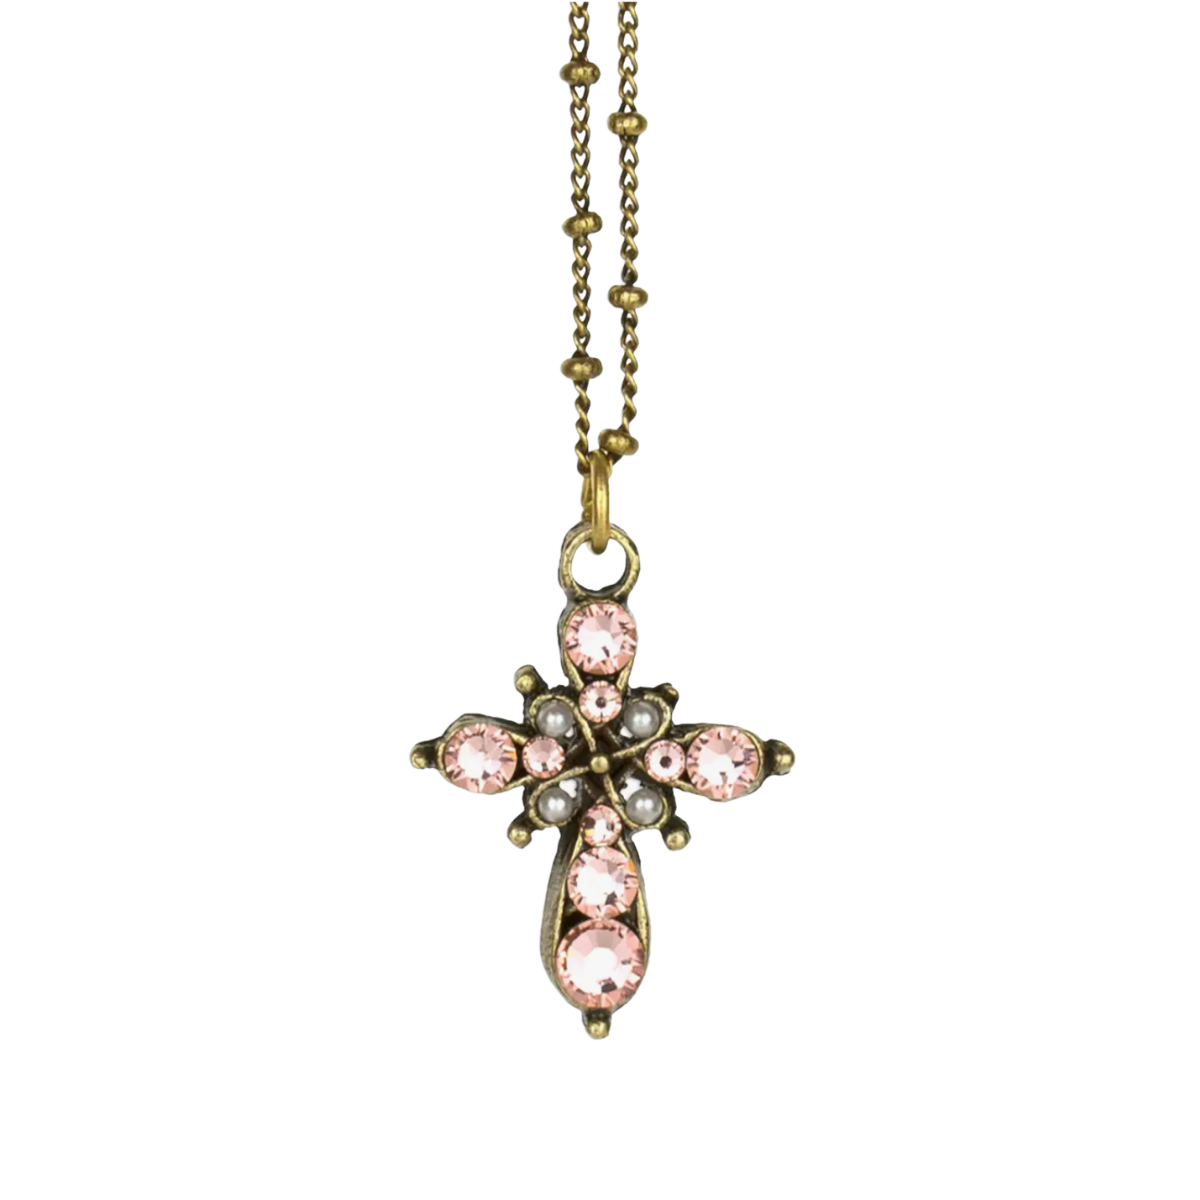 Dusty Rose Crystals Cross Necklace